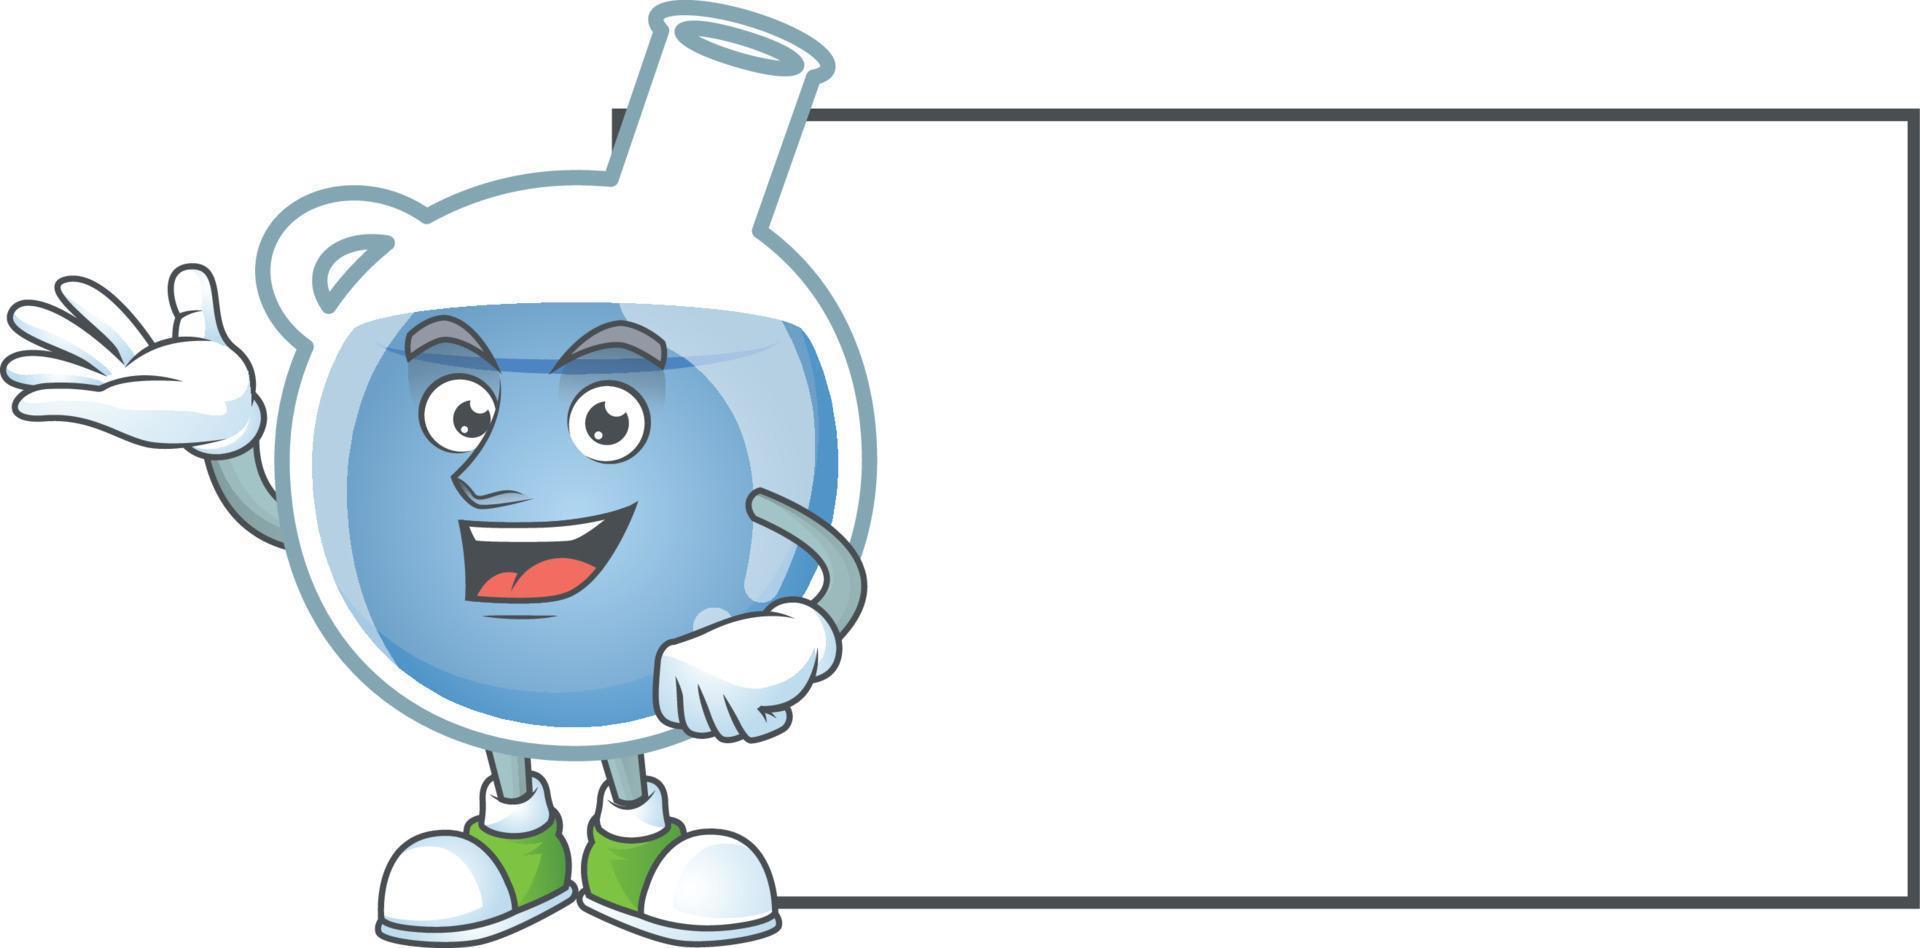 Blue potion cartoon character style vector